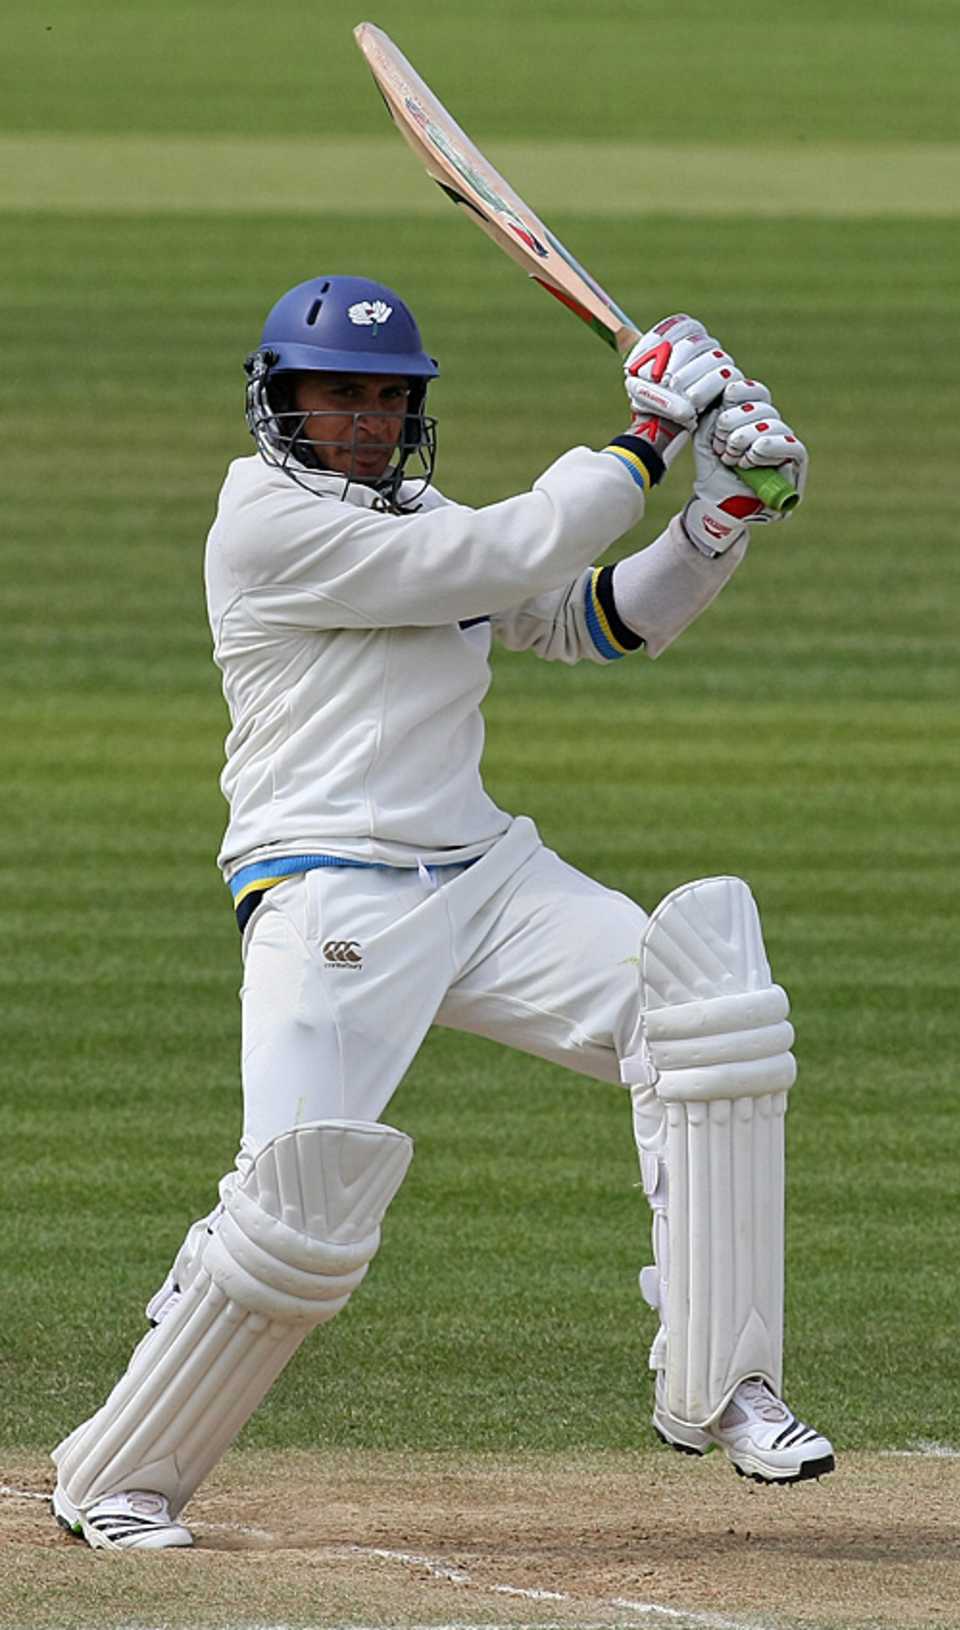 Adil Rashid crashes one square during his brisk 58 as Yorkshire set Warwickshire 281 to win